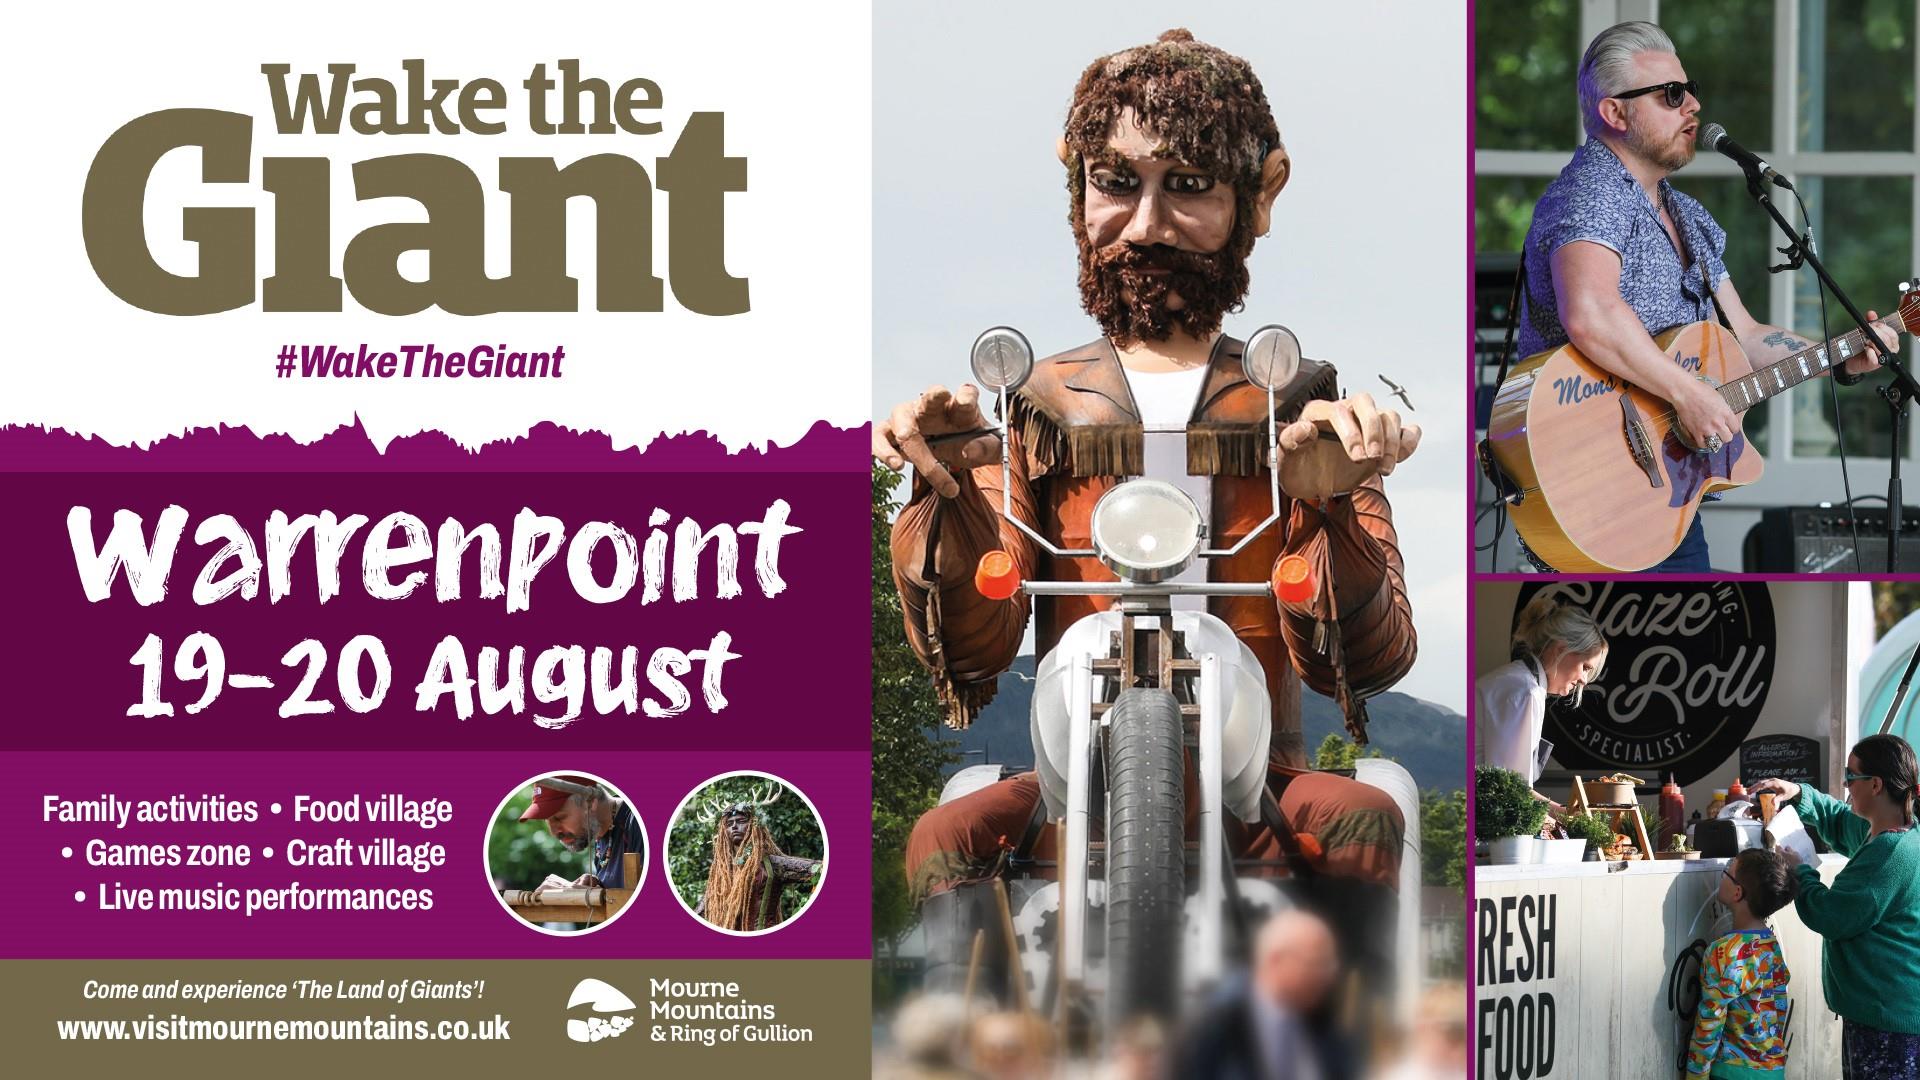 Poster promoting Wake the Giant, a giant even in Warrenpoint from 19-20 August 2023